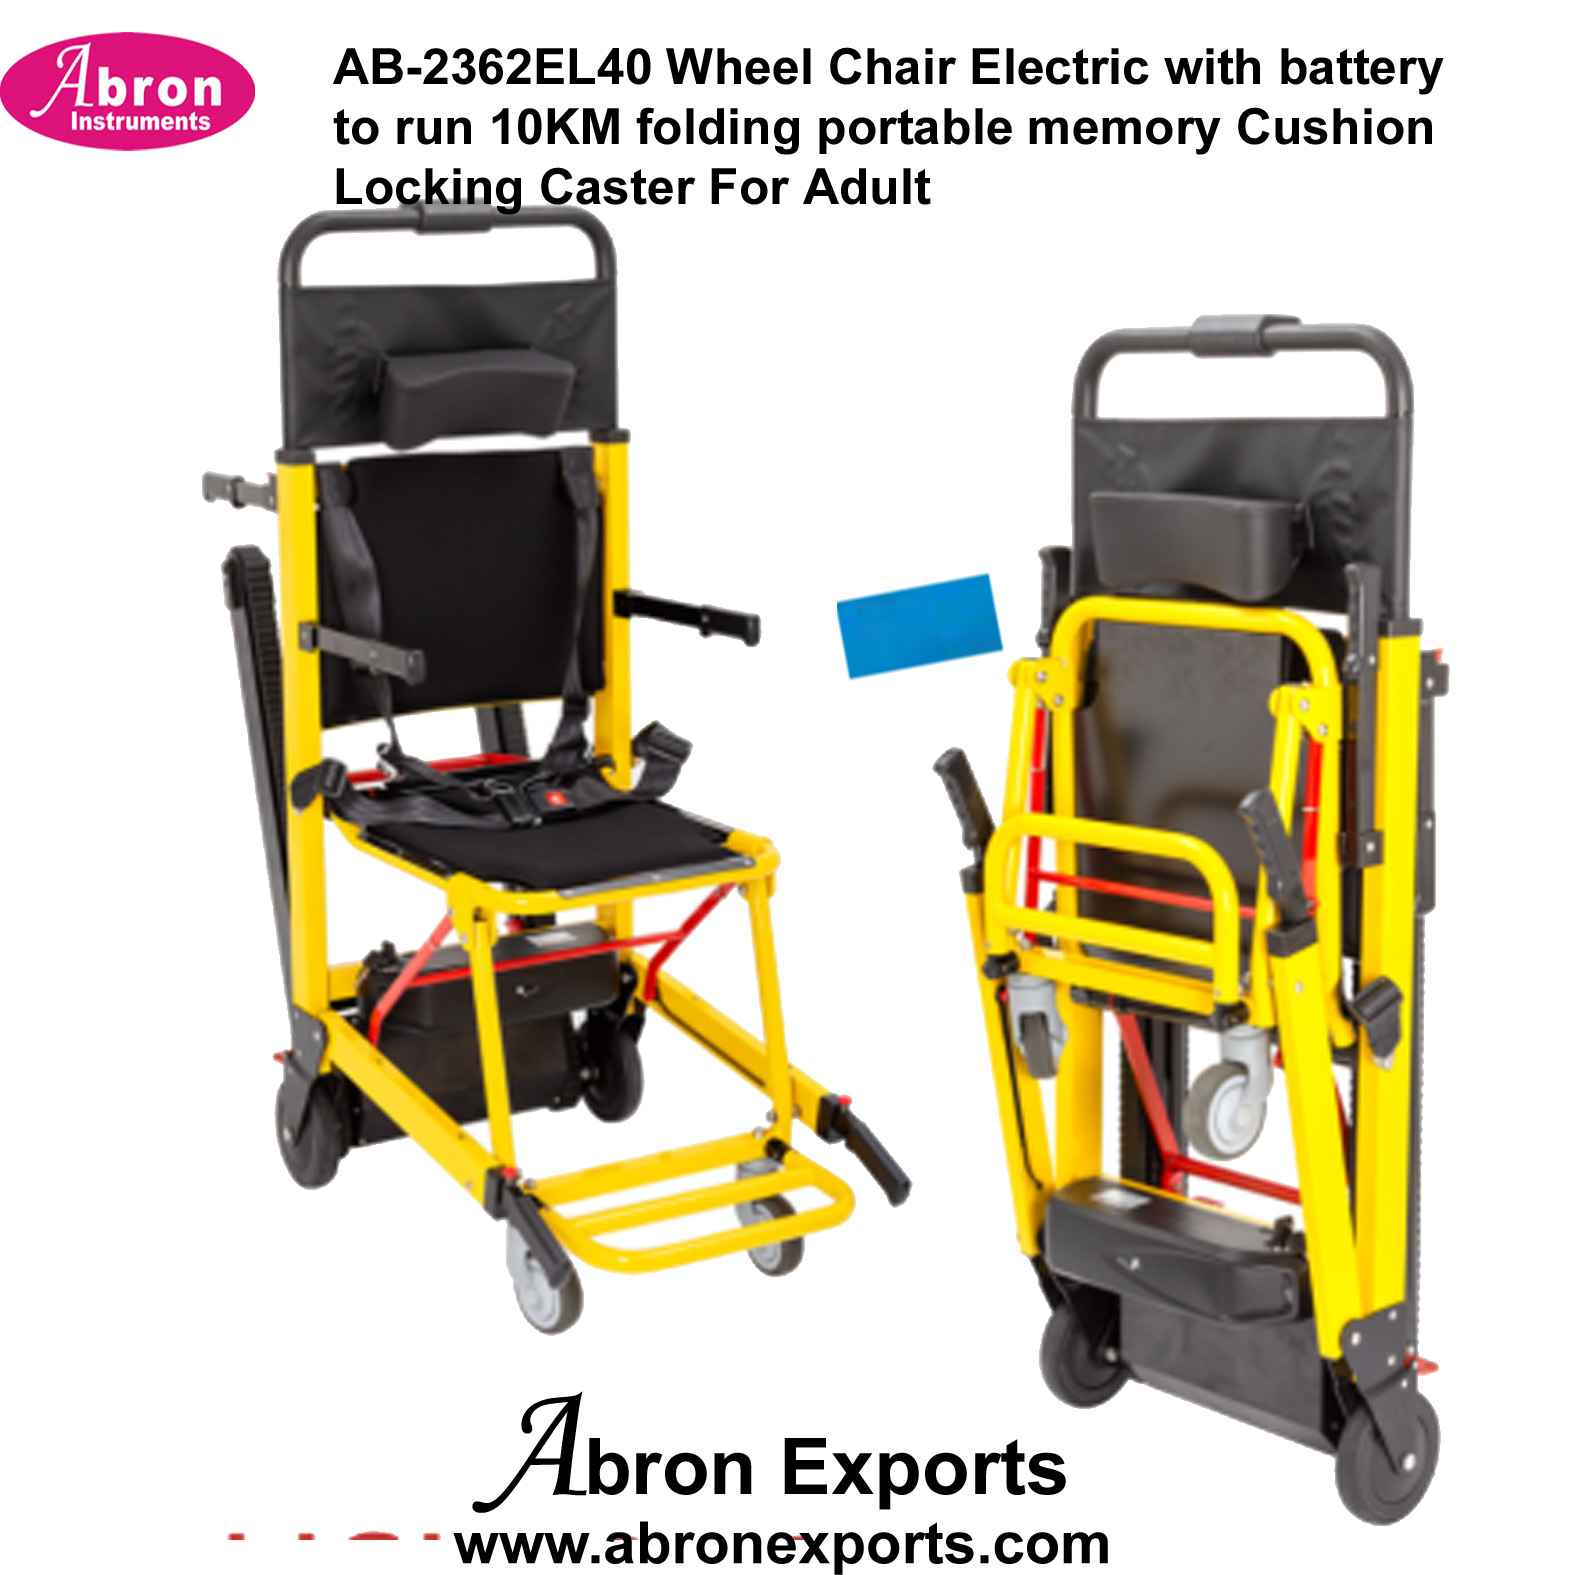 Wheel Chair Electric with battery to run 10KM folding portable memory Cushion Locking Caster 40 KG each to operate For Adult ABM-2362EL40